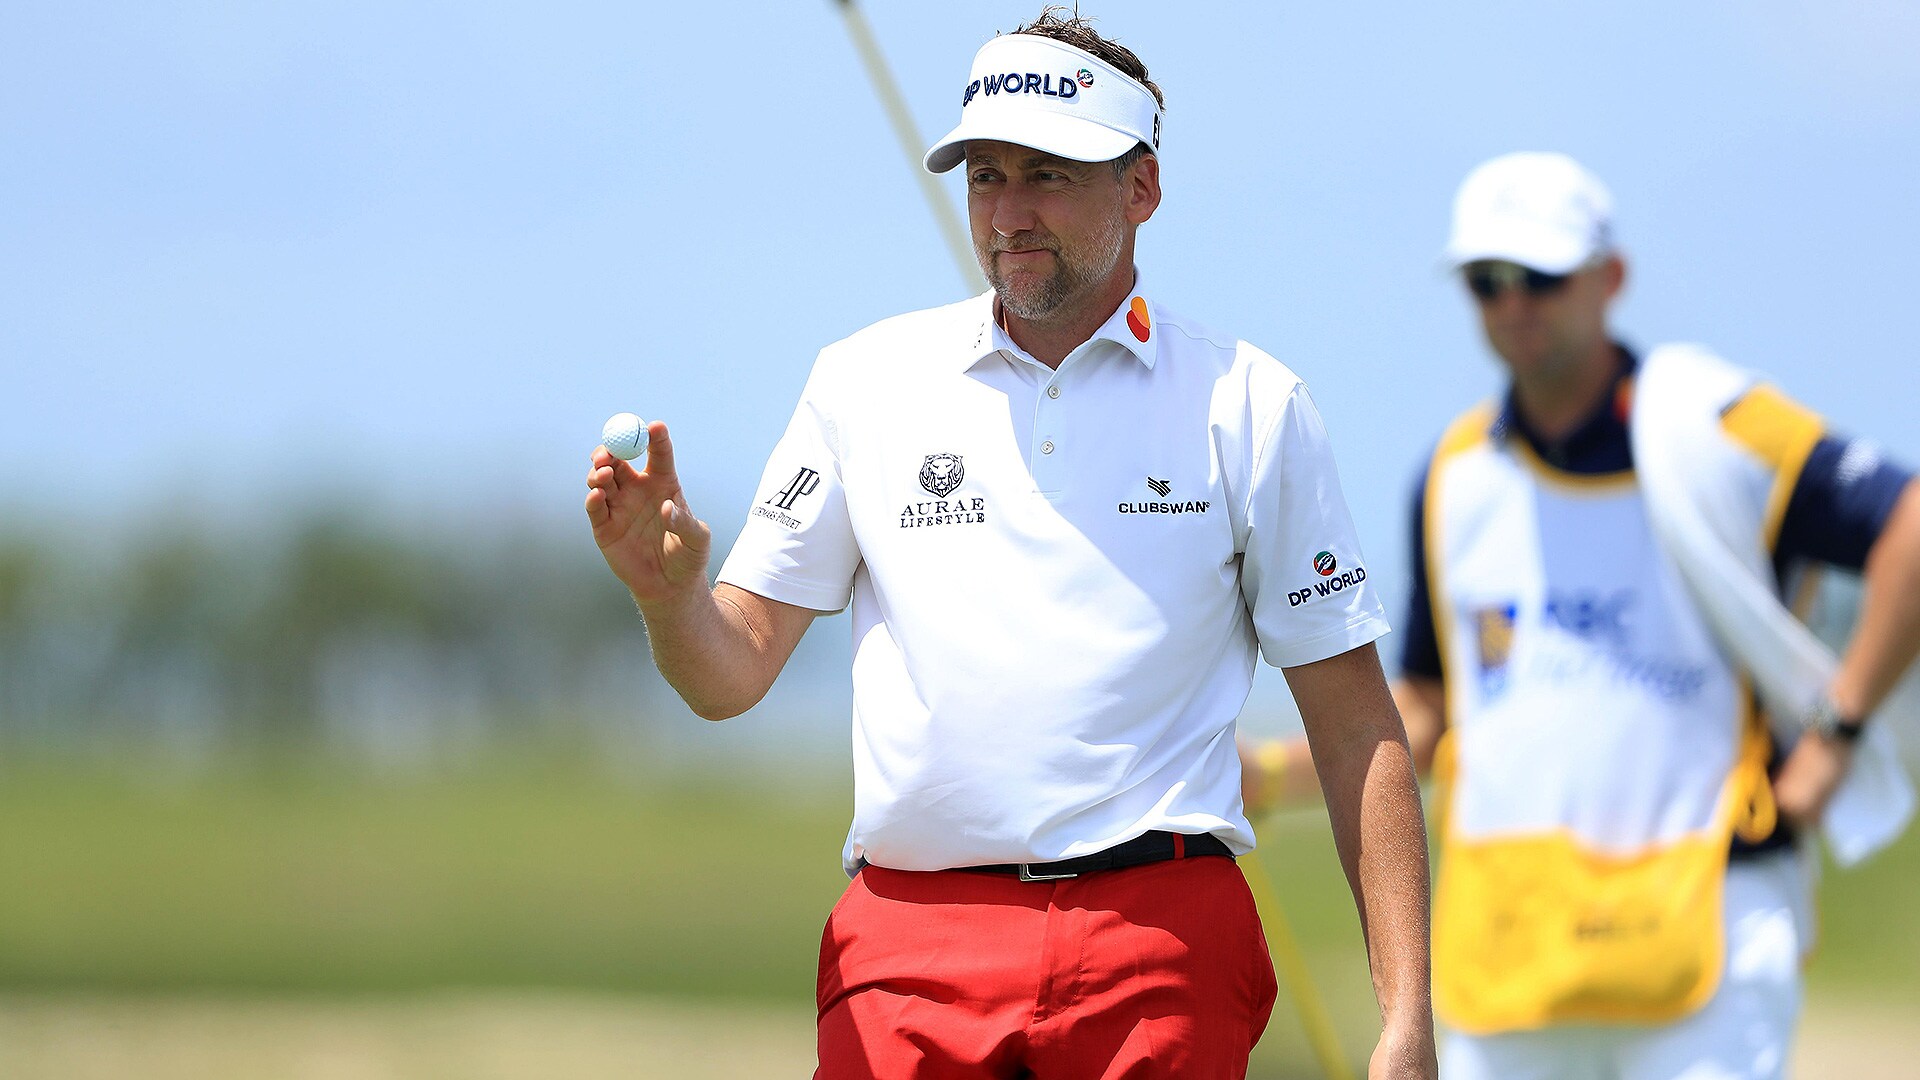 Ian Poulter, Mark Hubbard share lead after opening 64s at RBC Heritage